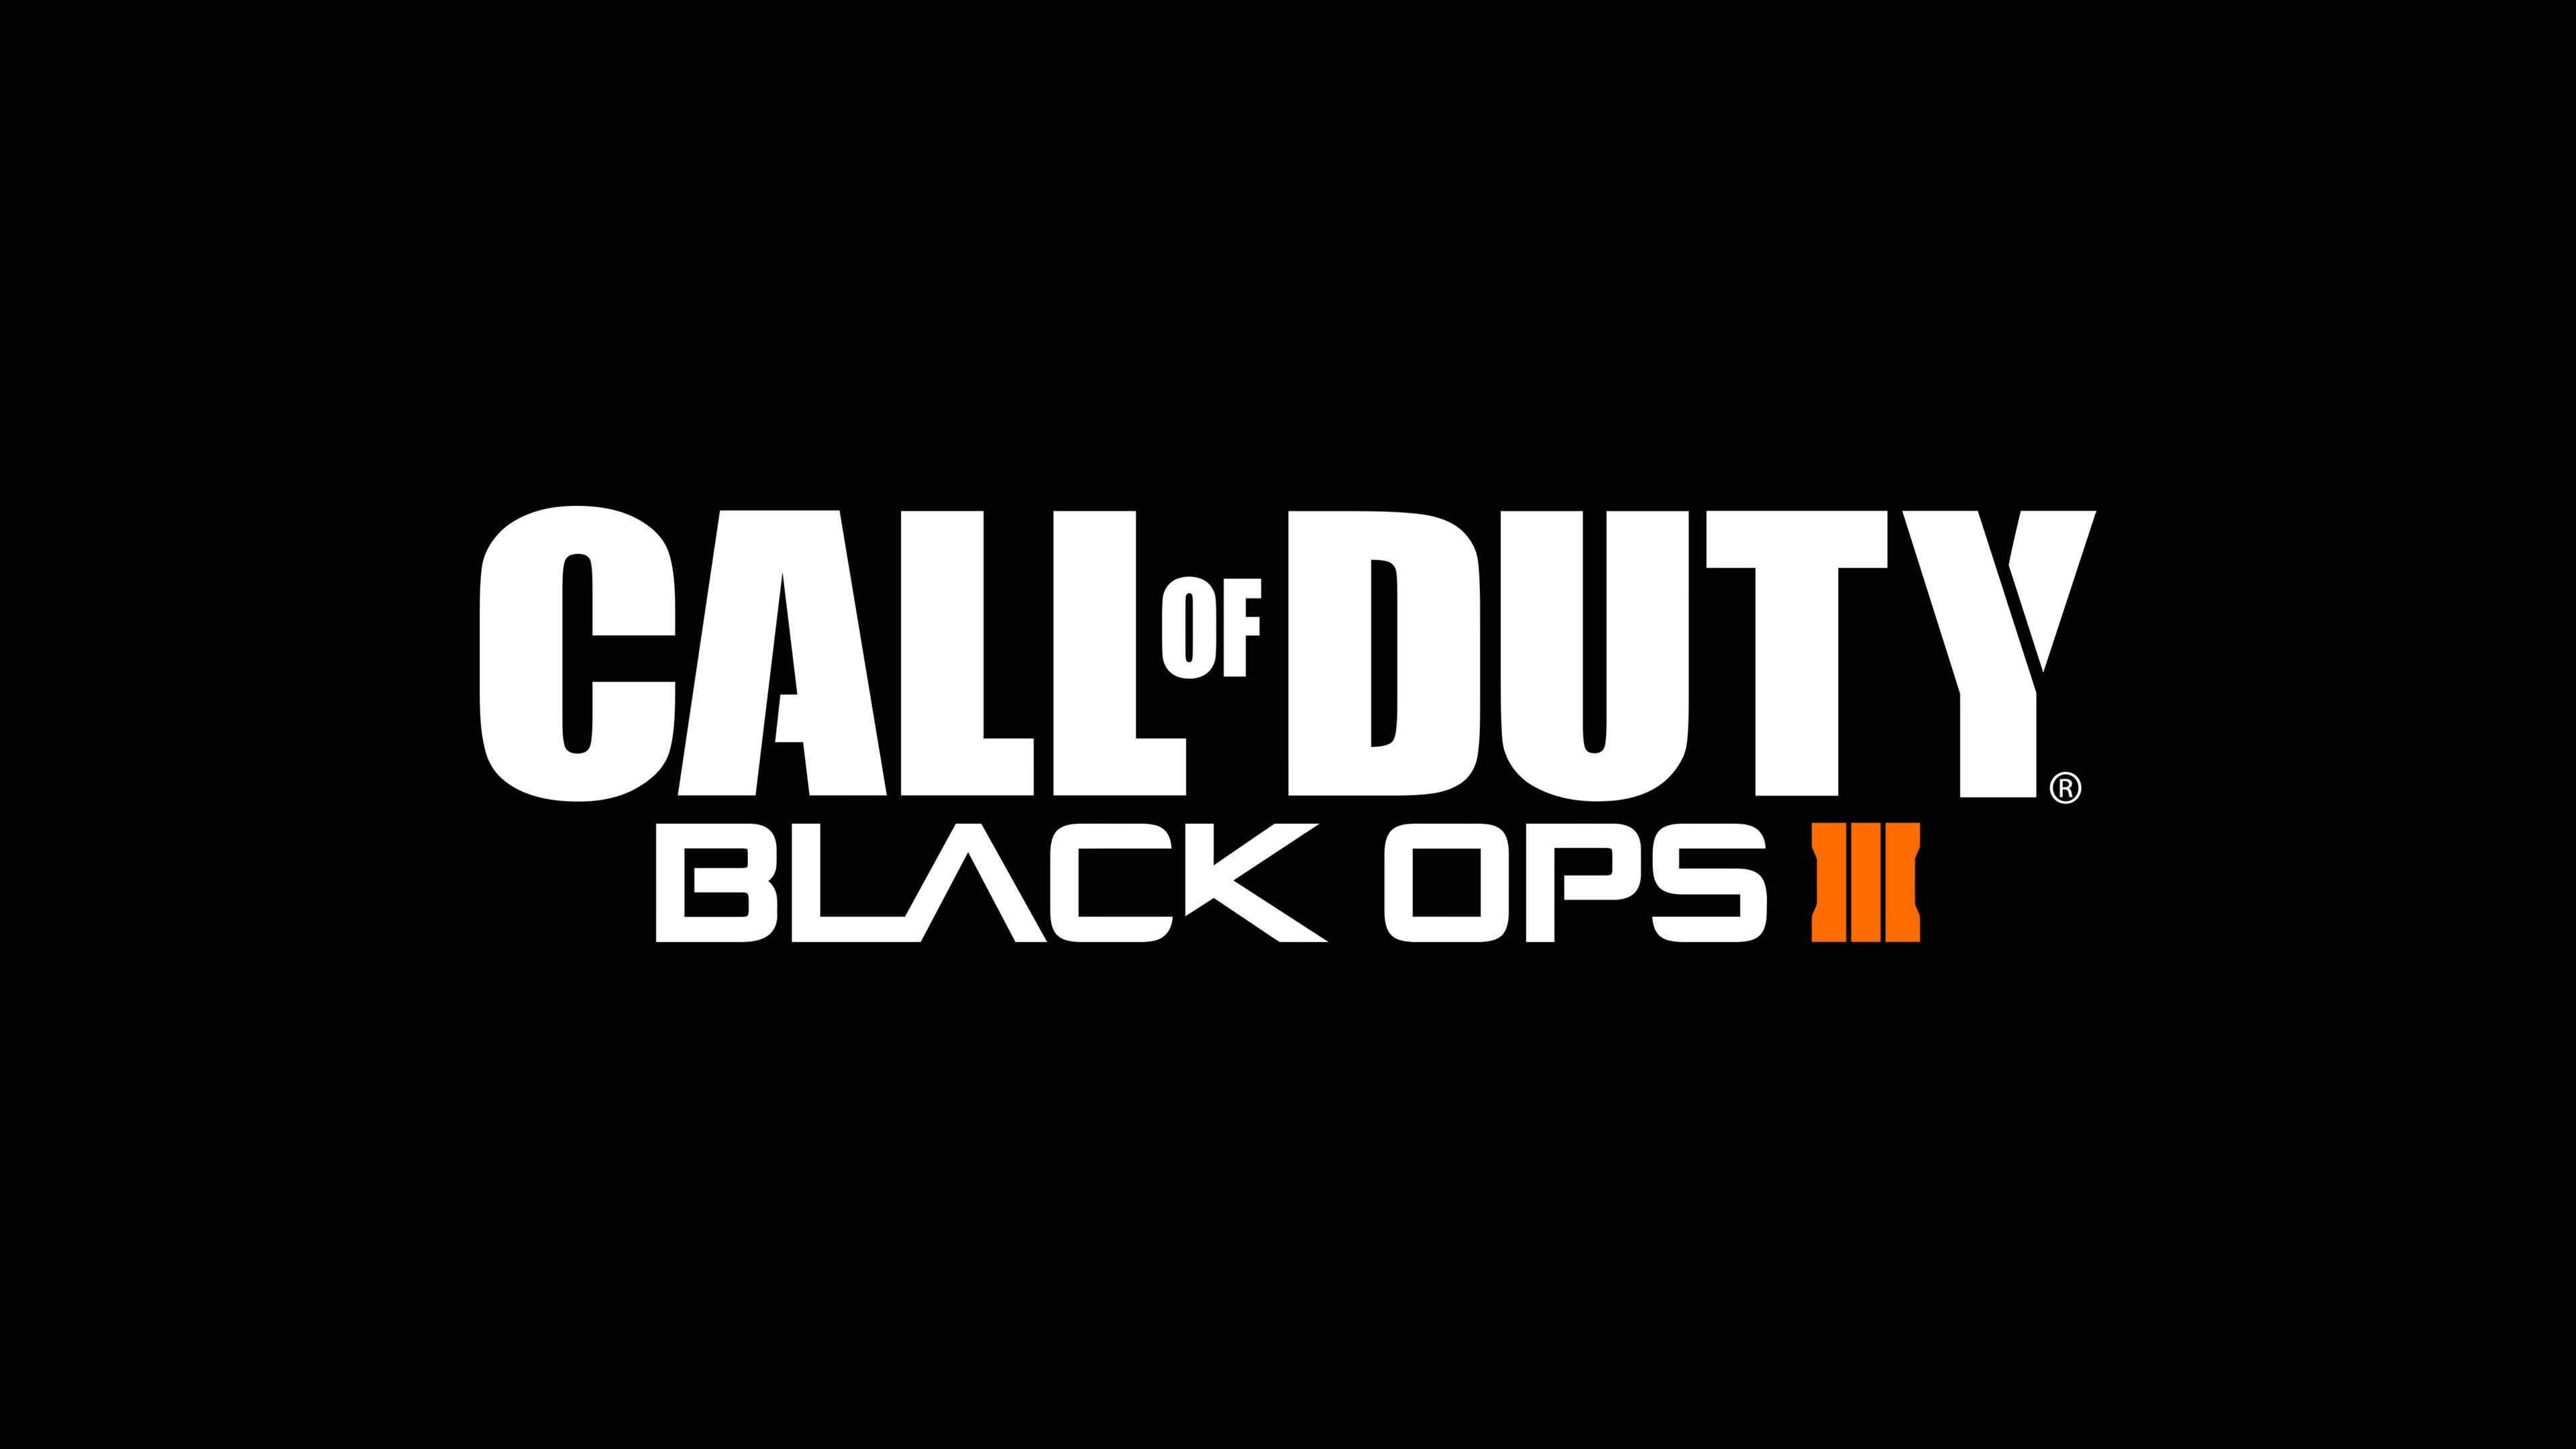 Télécharger Call Of Duty Black Ops III